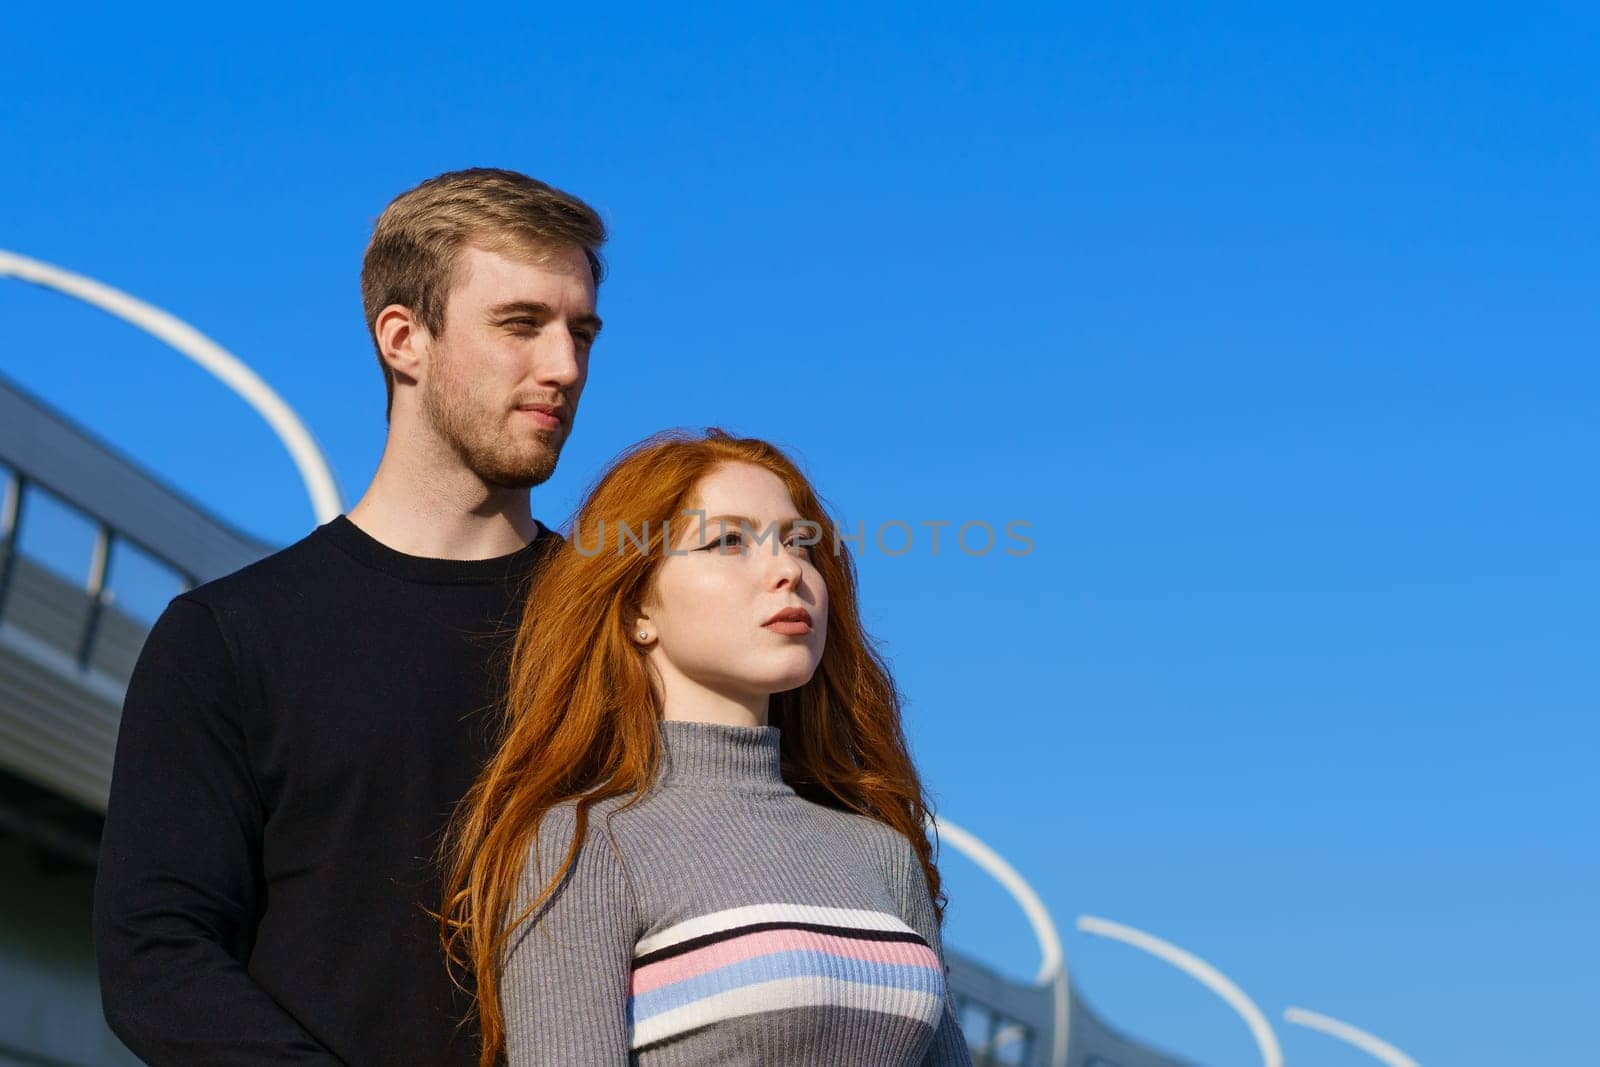 happy young couple man and woman with long red hair, stand against the background of a blue sky and a bridge in casual clothes and smile. Cheerful guy and Caucasian girl on a sunny day